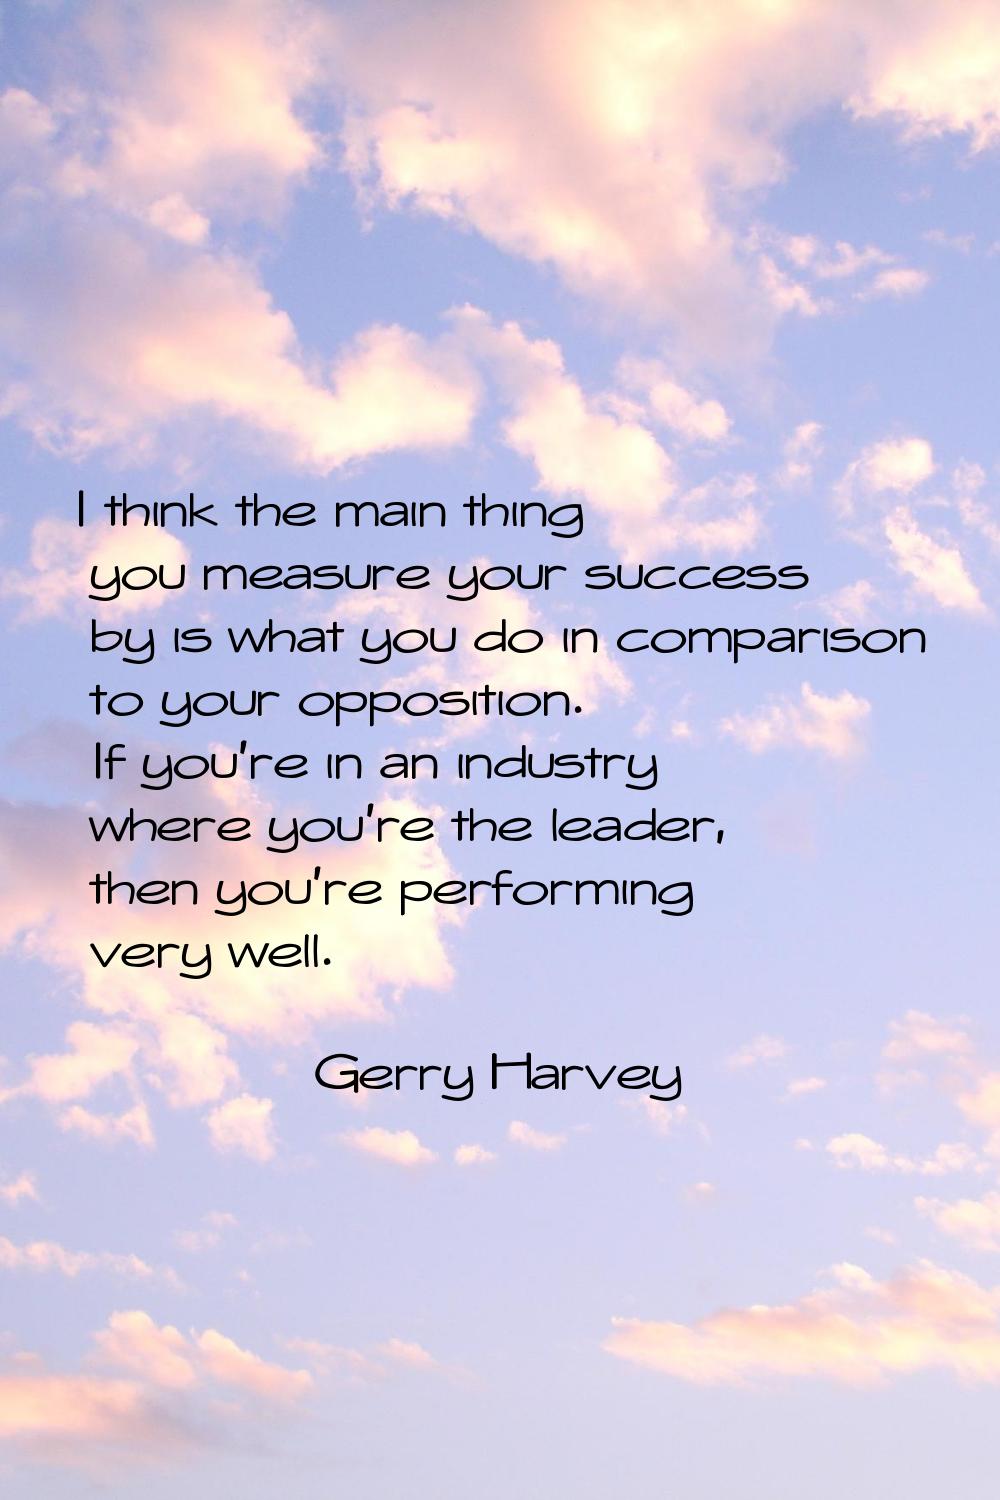 I think the main thing you measure your success by is what you do in comparison to your opposition.